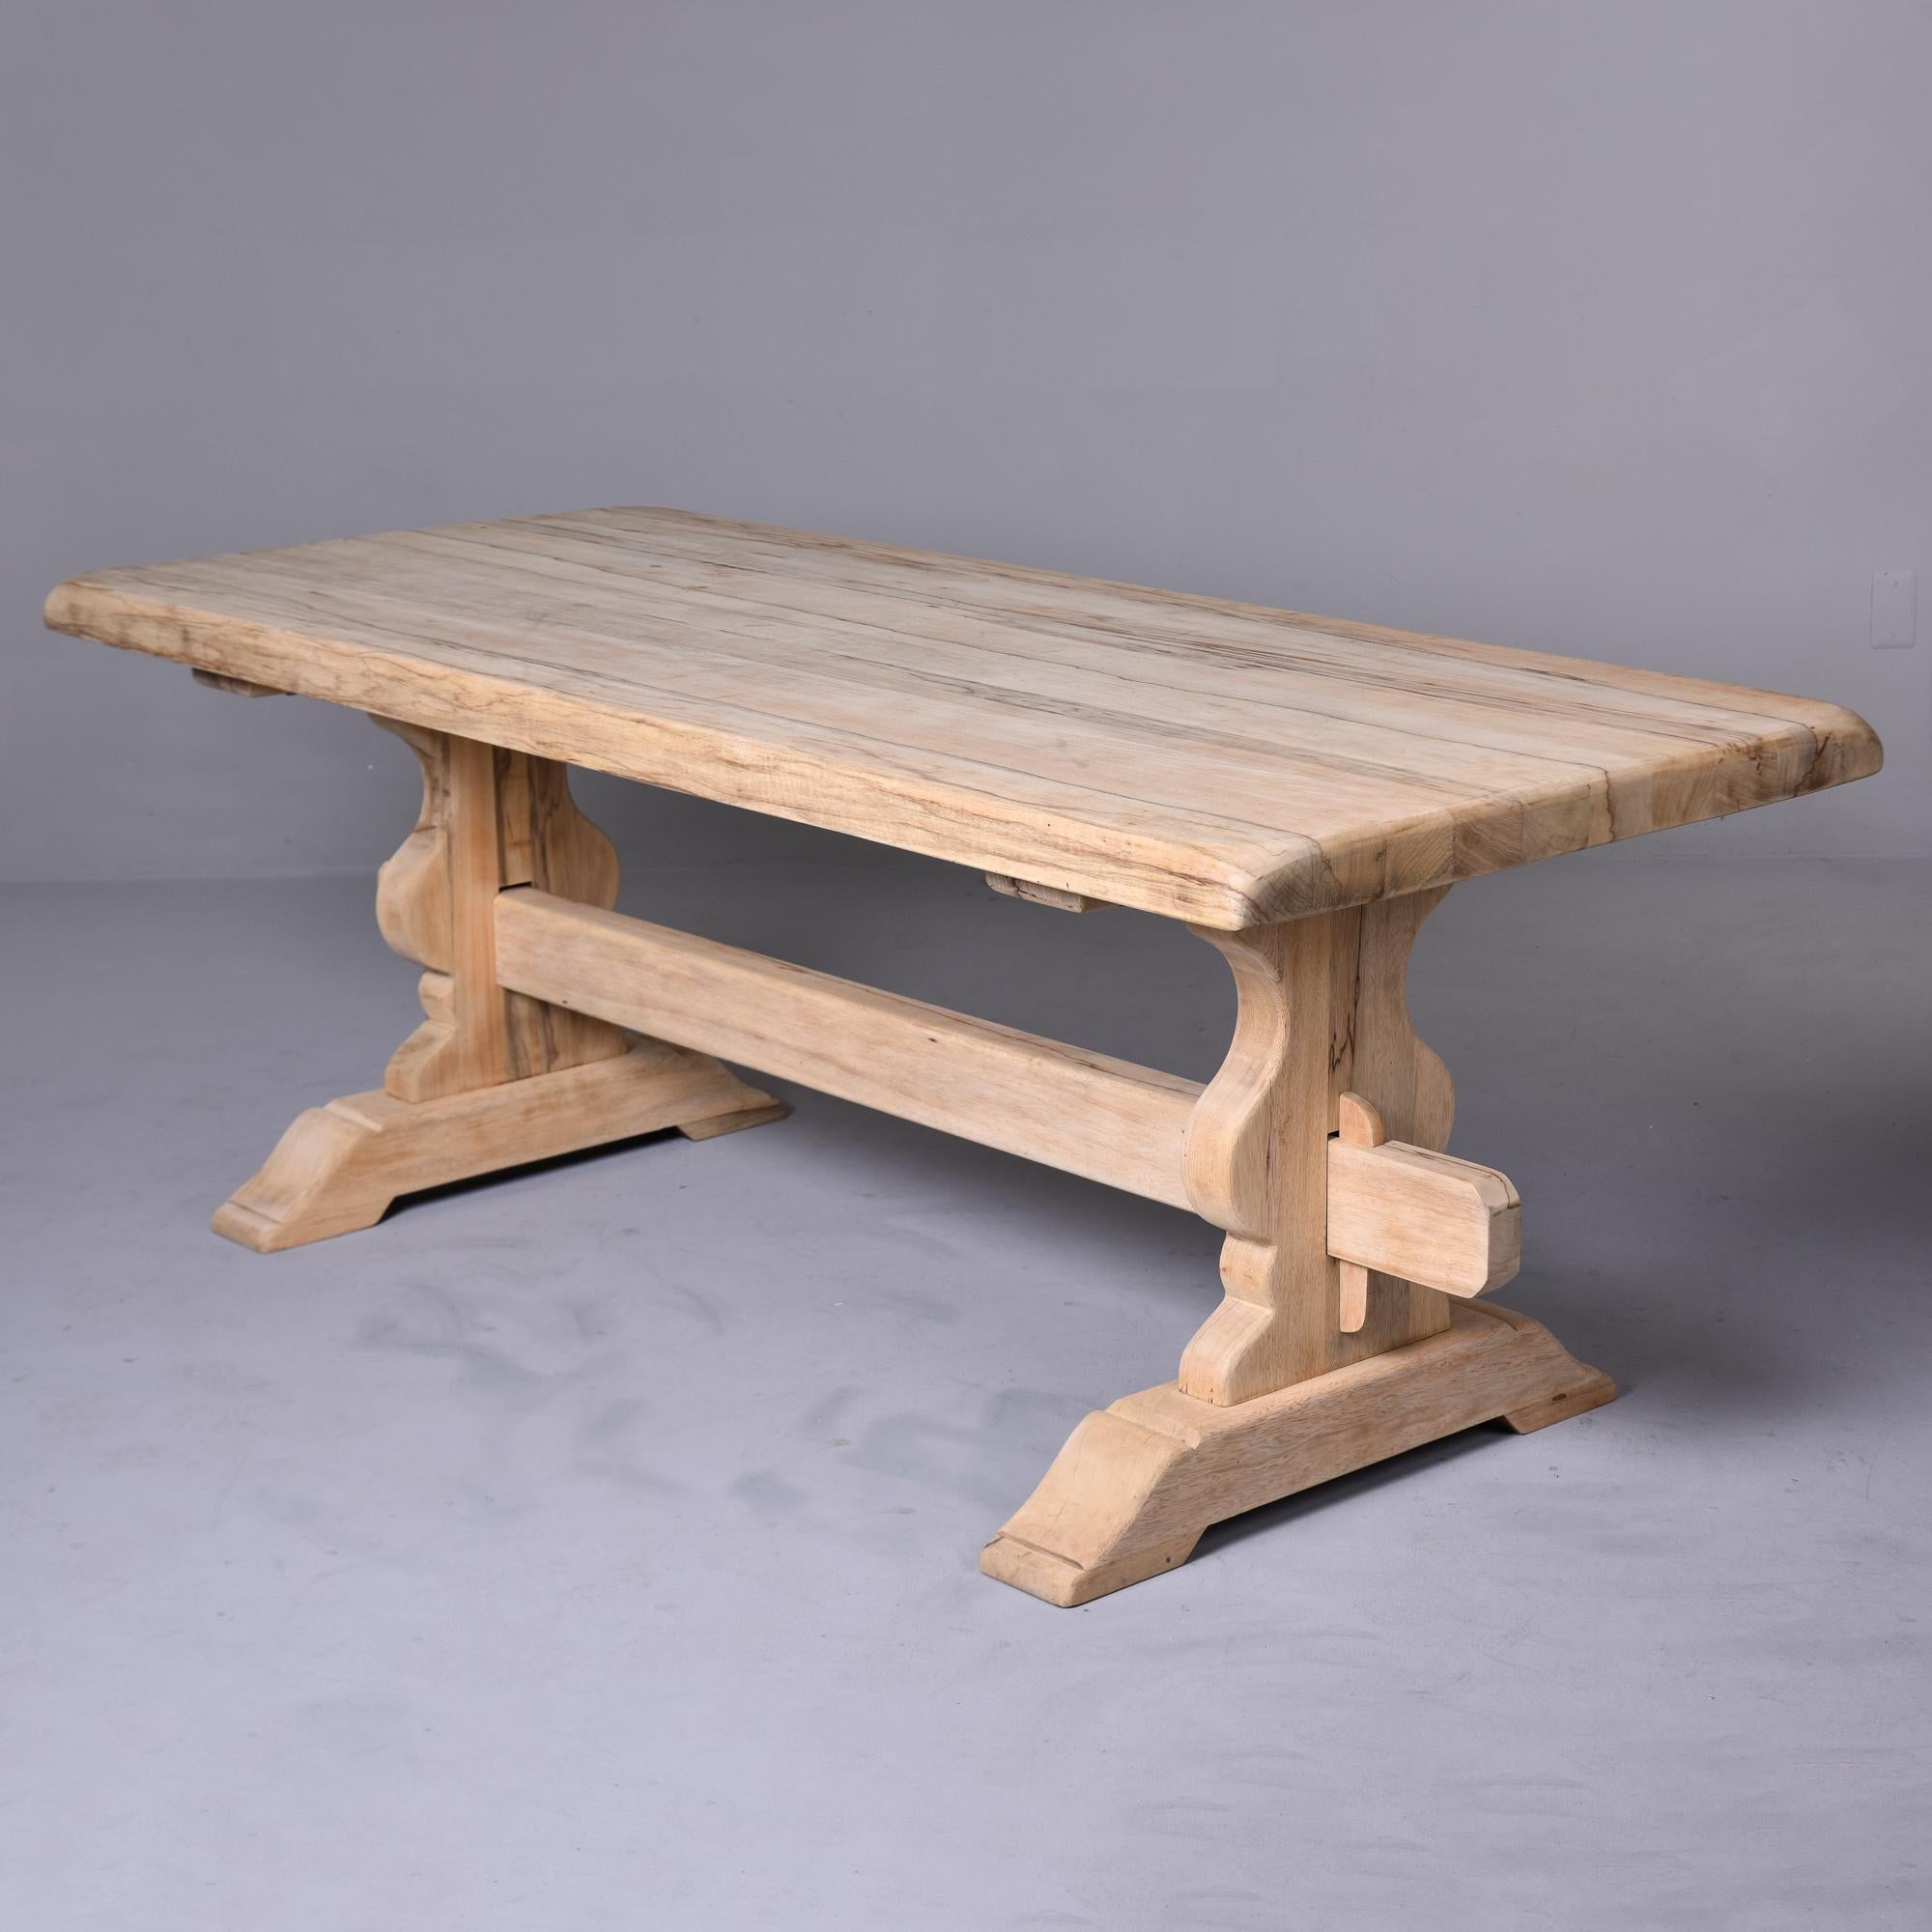 Found in France, this circa 1880s French oak farm trestle table has a bare finish and has been sanded smooth.  Classic trestle-style table is structurally sturdy with mortise and tenon construction. Scattered visible age and honest wear to table top